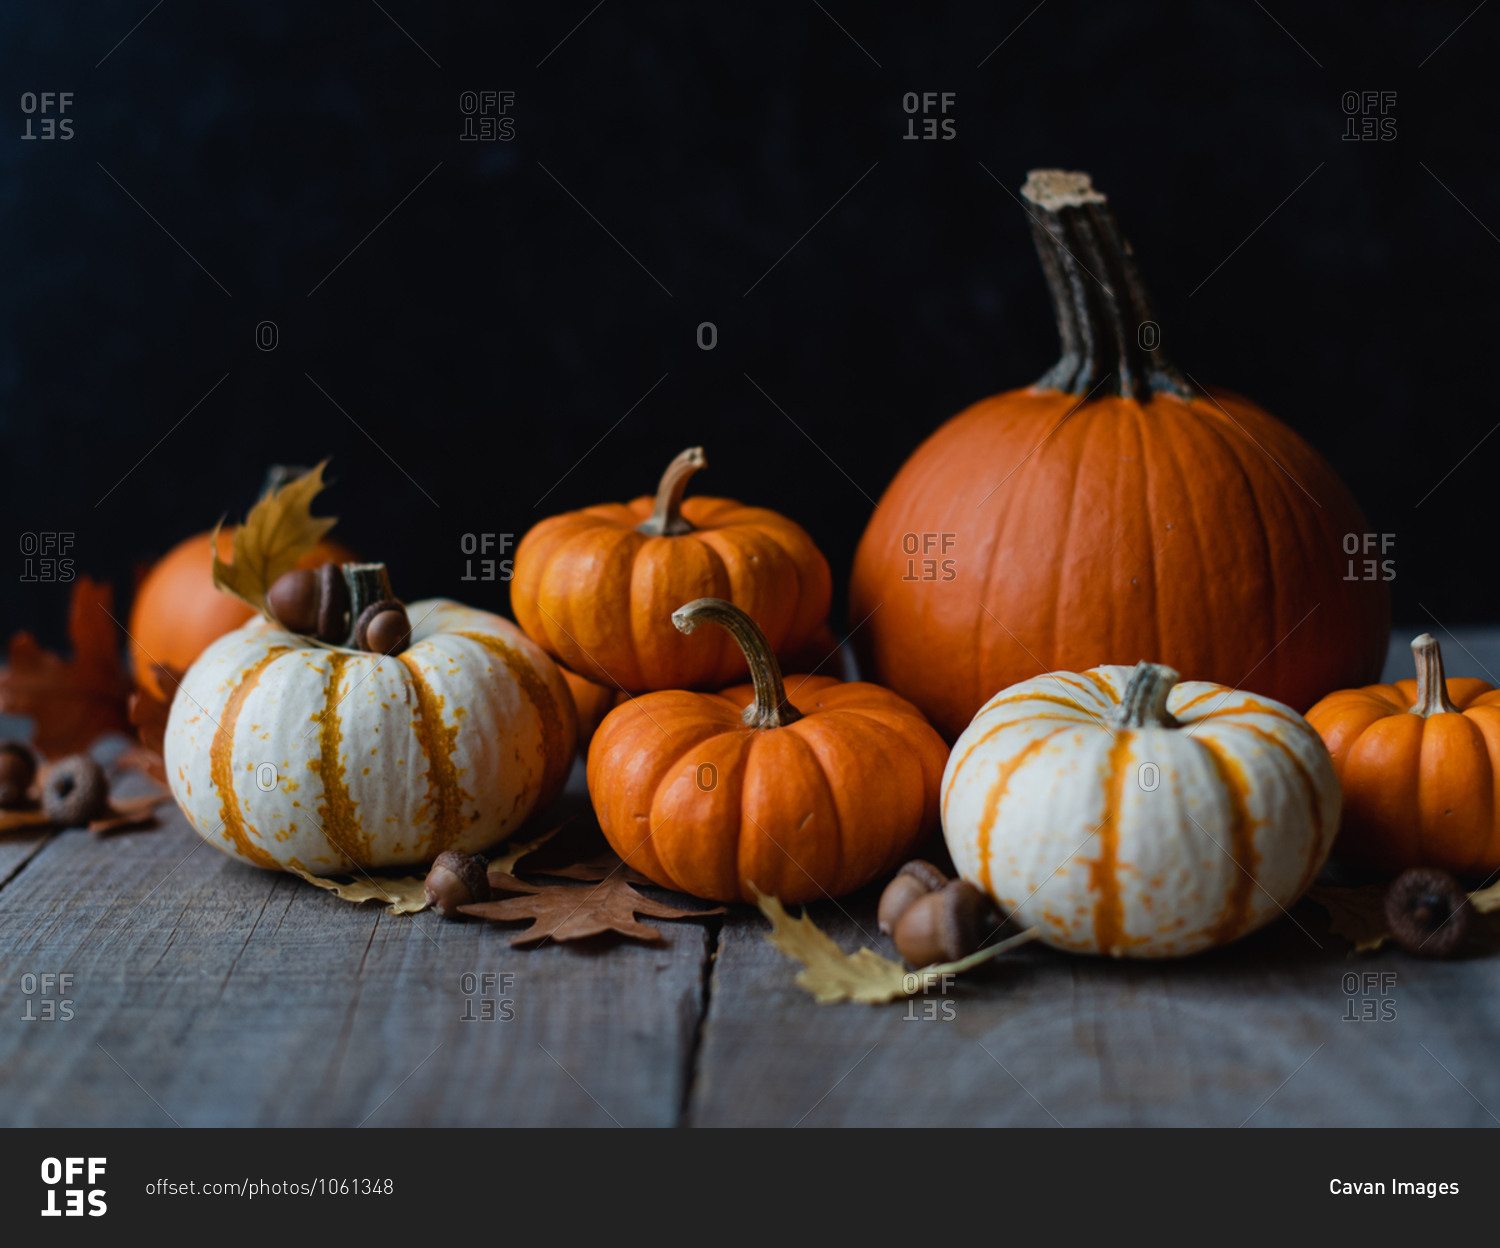 Still life of orange and white pumpkins on rustic wooden table.